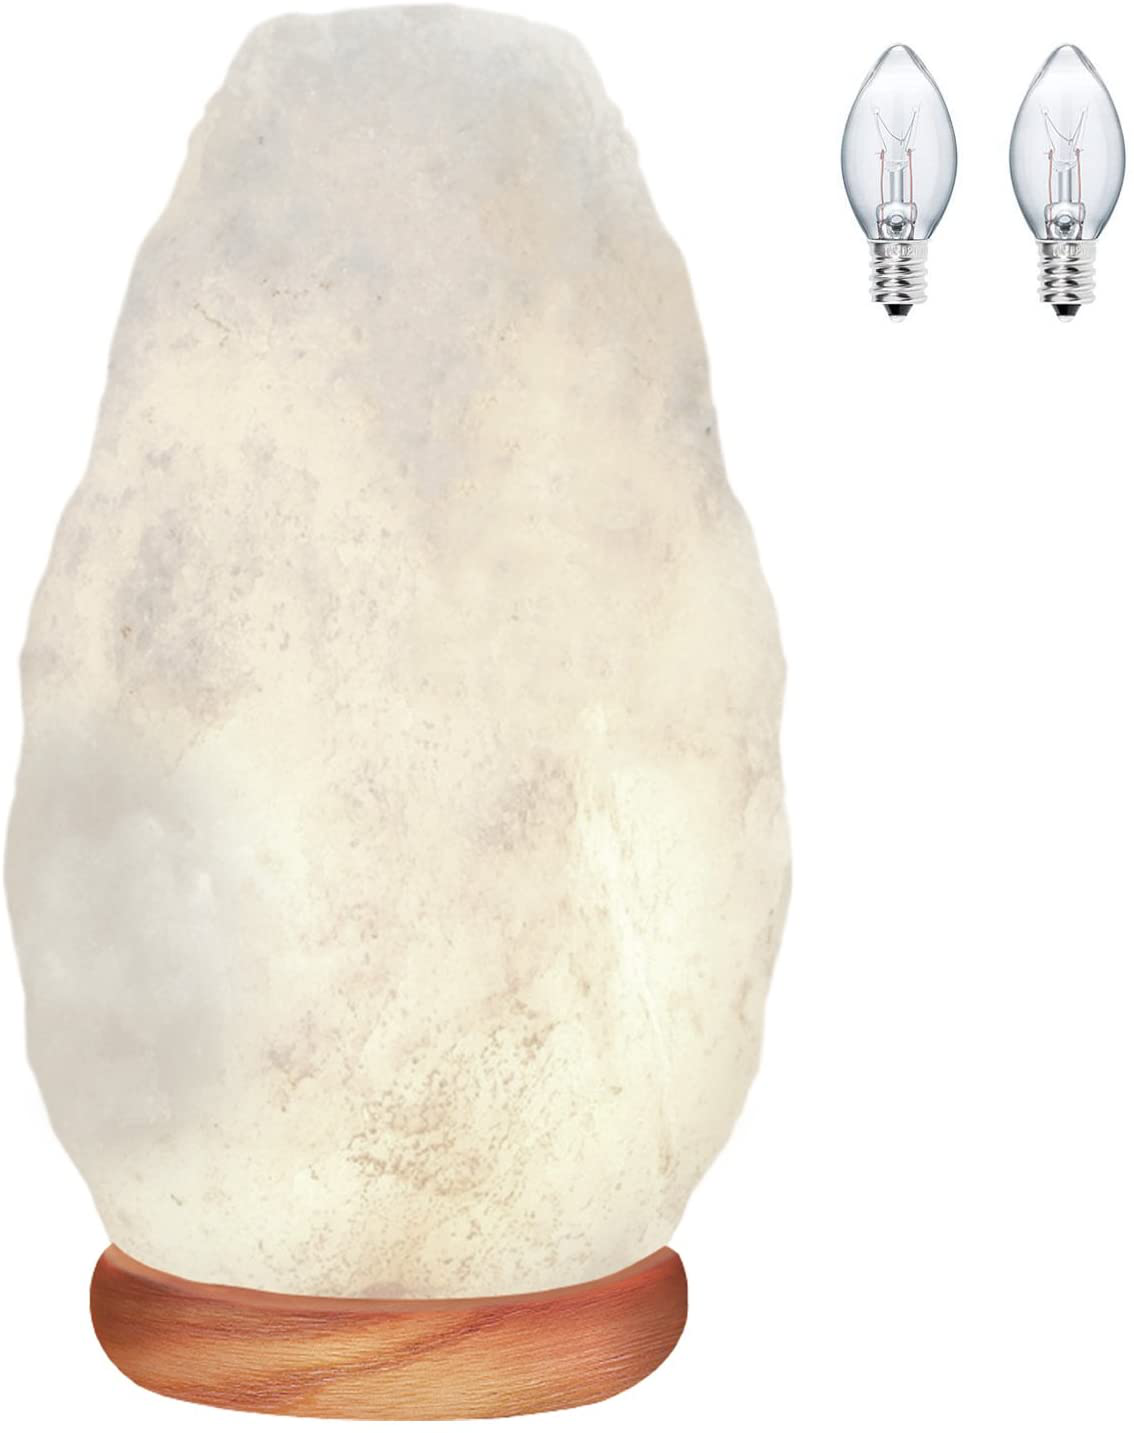 White Salt Crystal Lamp Hand Crafted Salt Lamp With Neem Wooden Base 5-7 Lbs NEW